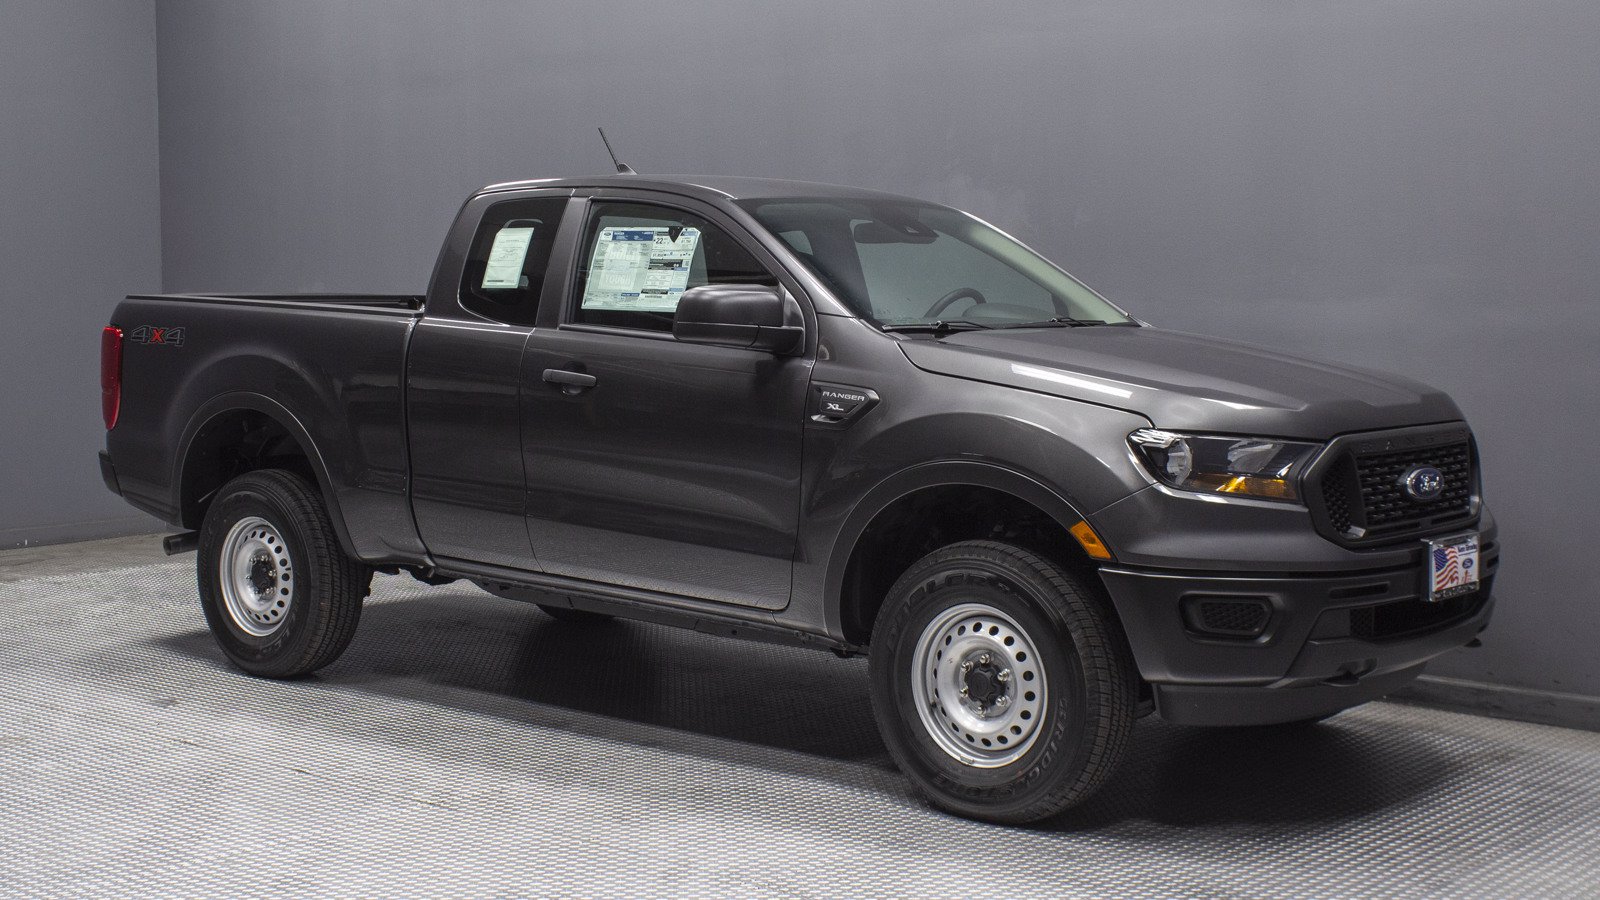 New 2020 Ford Ranger XL Extended Cab Pickup in Buena Park #02326 | Ken ...